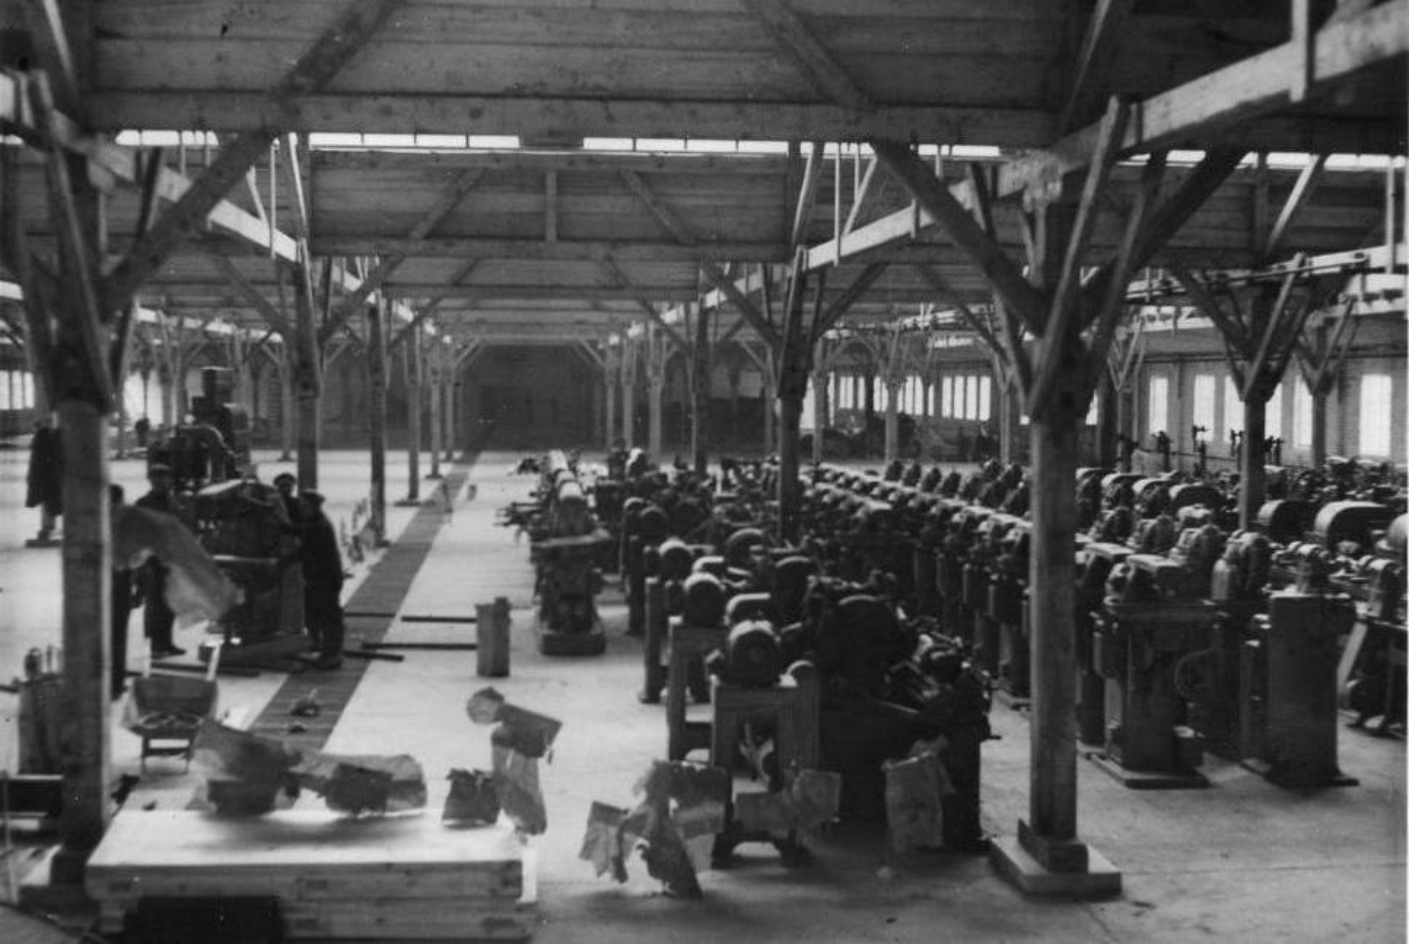 Interior view of the workshop hall at Gustloff Plant II. The hall is partially filled with workbenches arranged in rows. Four workers stand at a single machine.